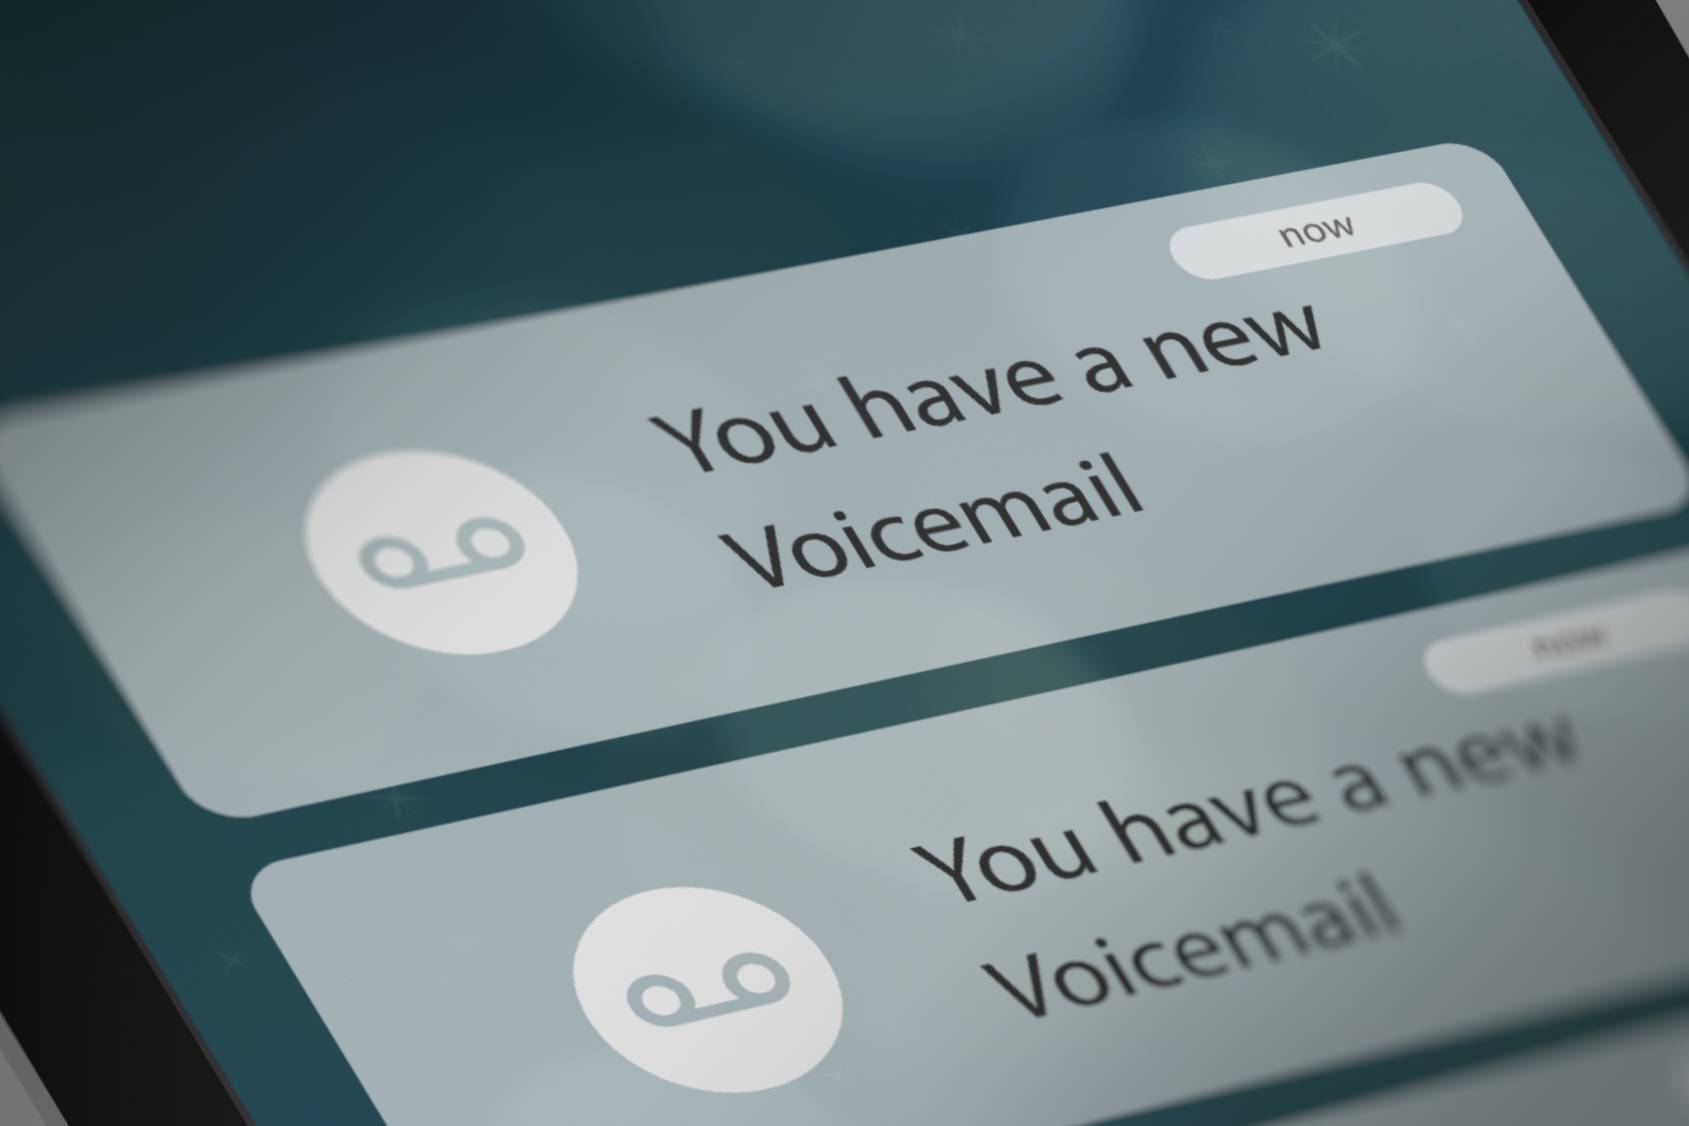 Leave Voicemail Without Calling – Step by Step Guide